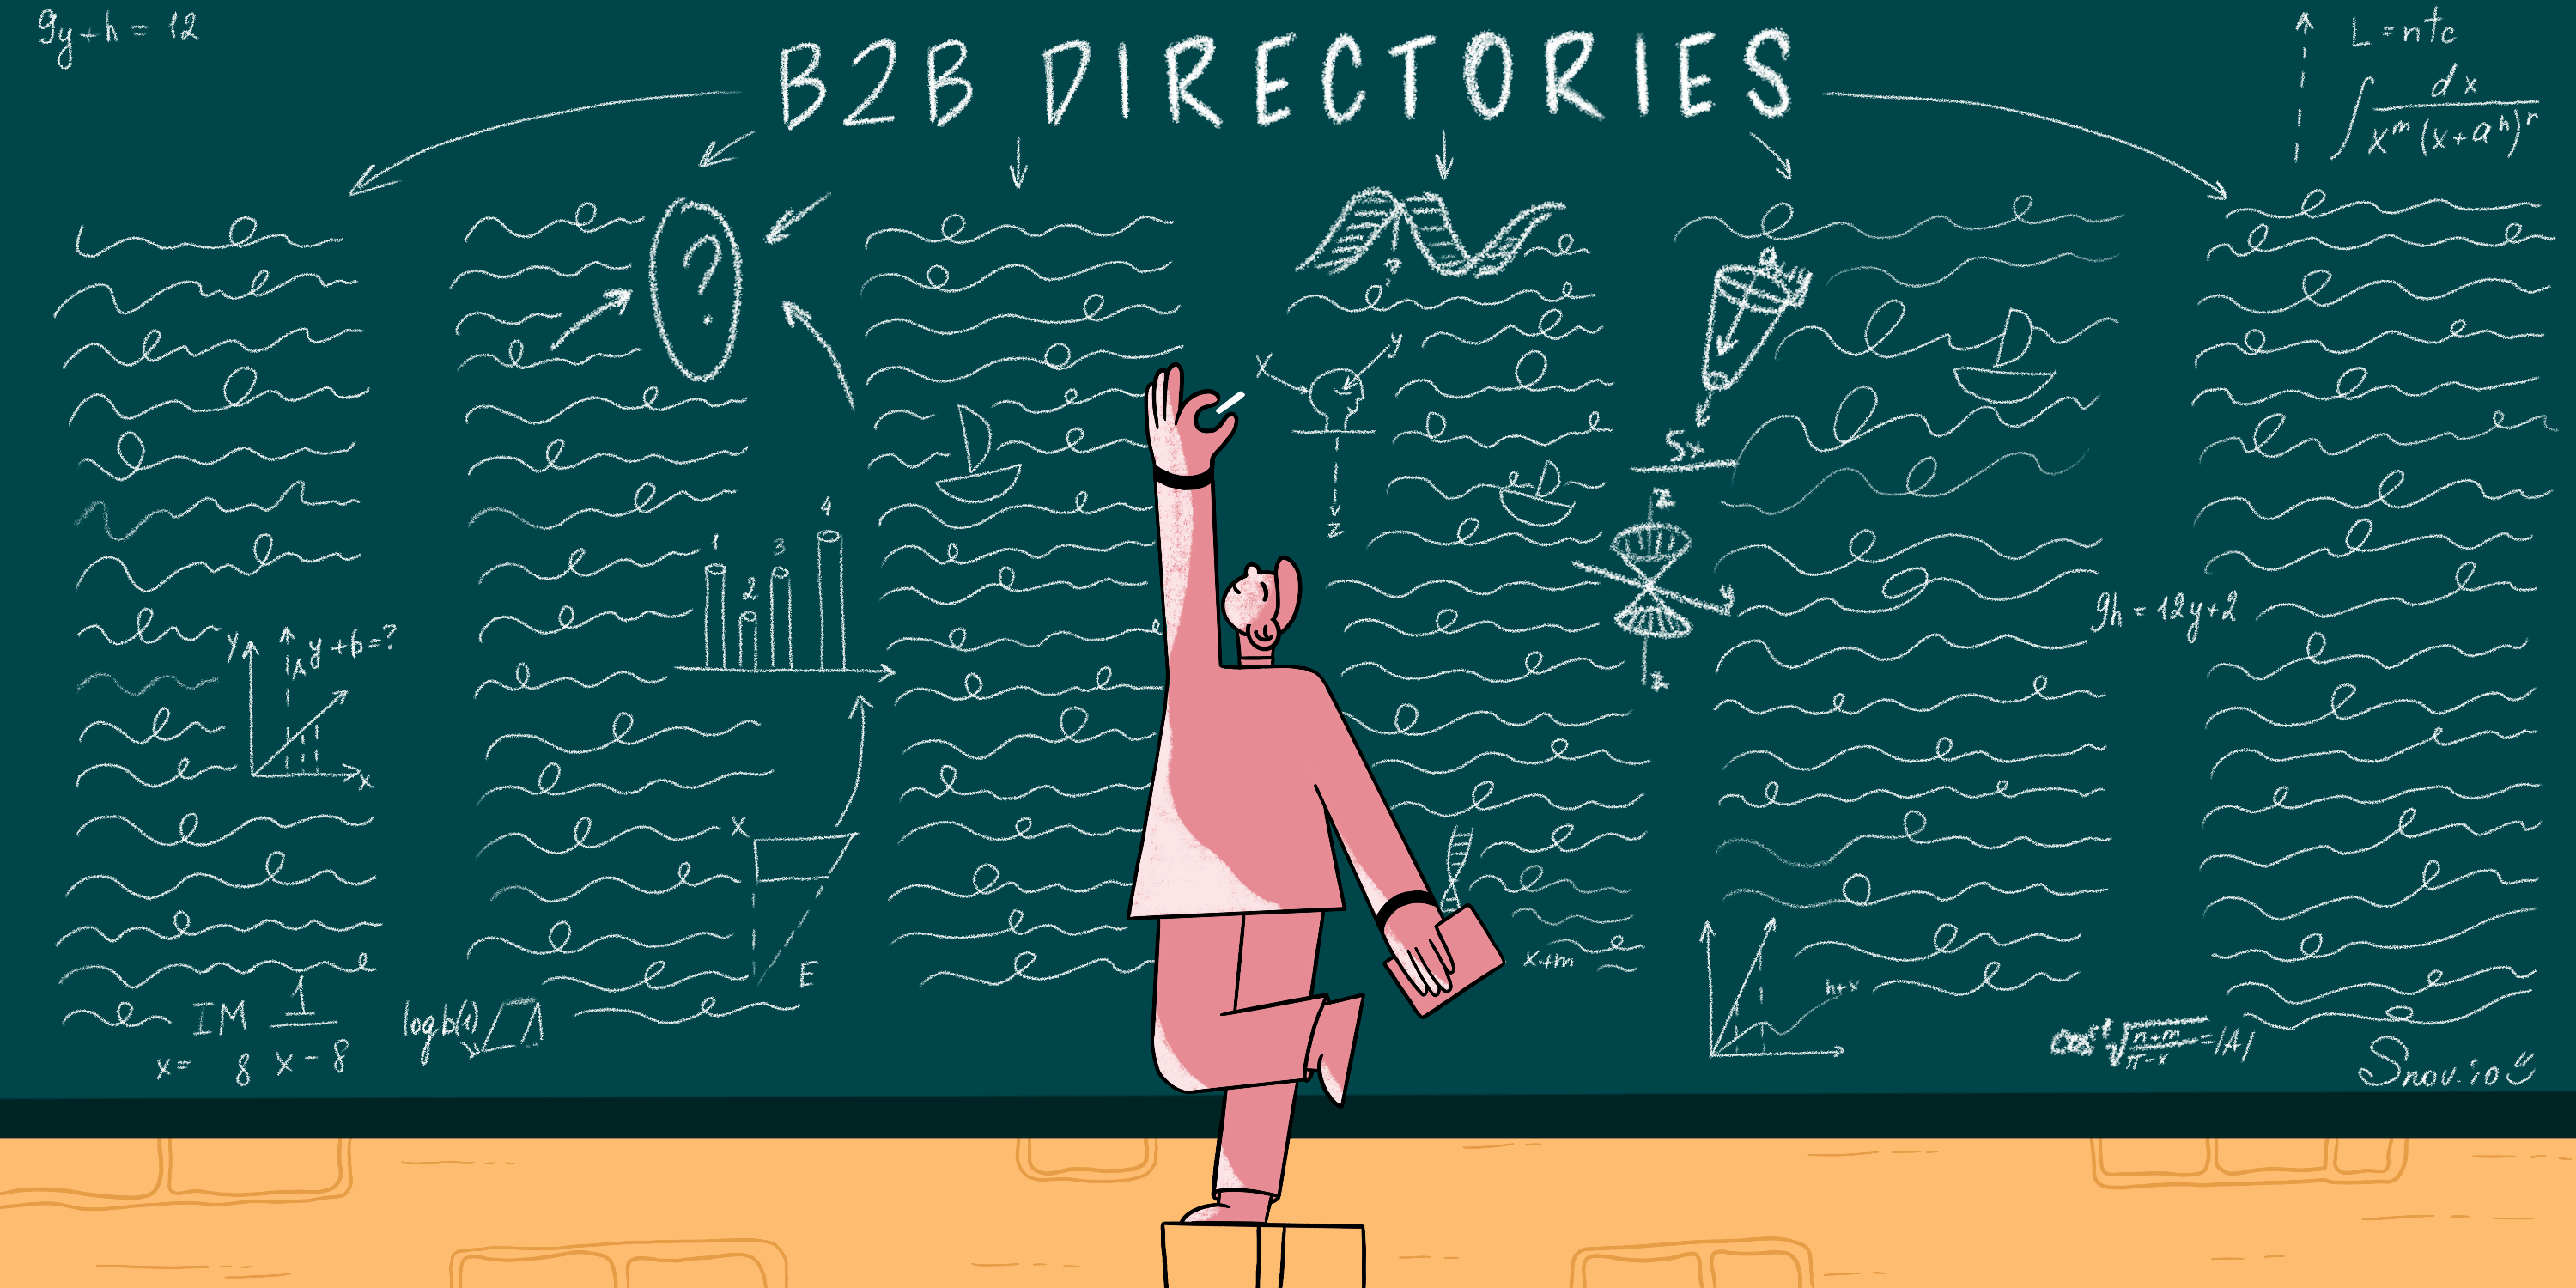 b2b directories for lead generation